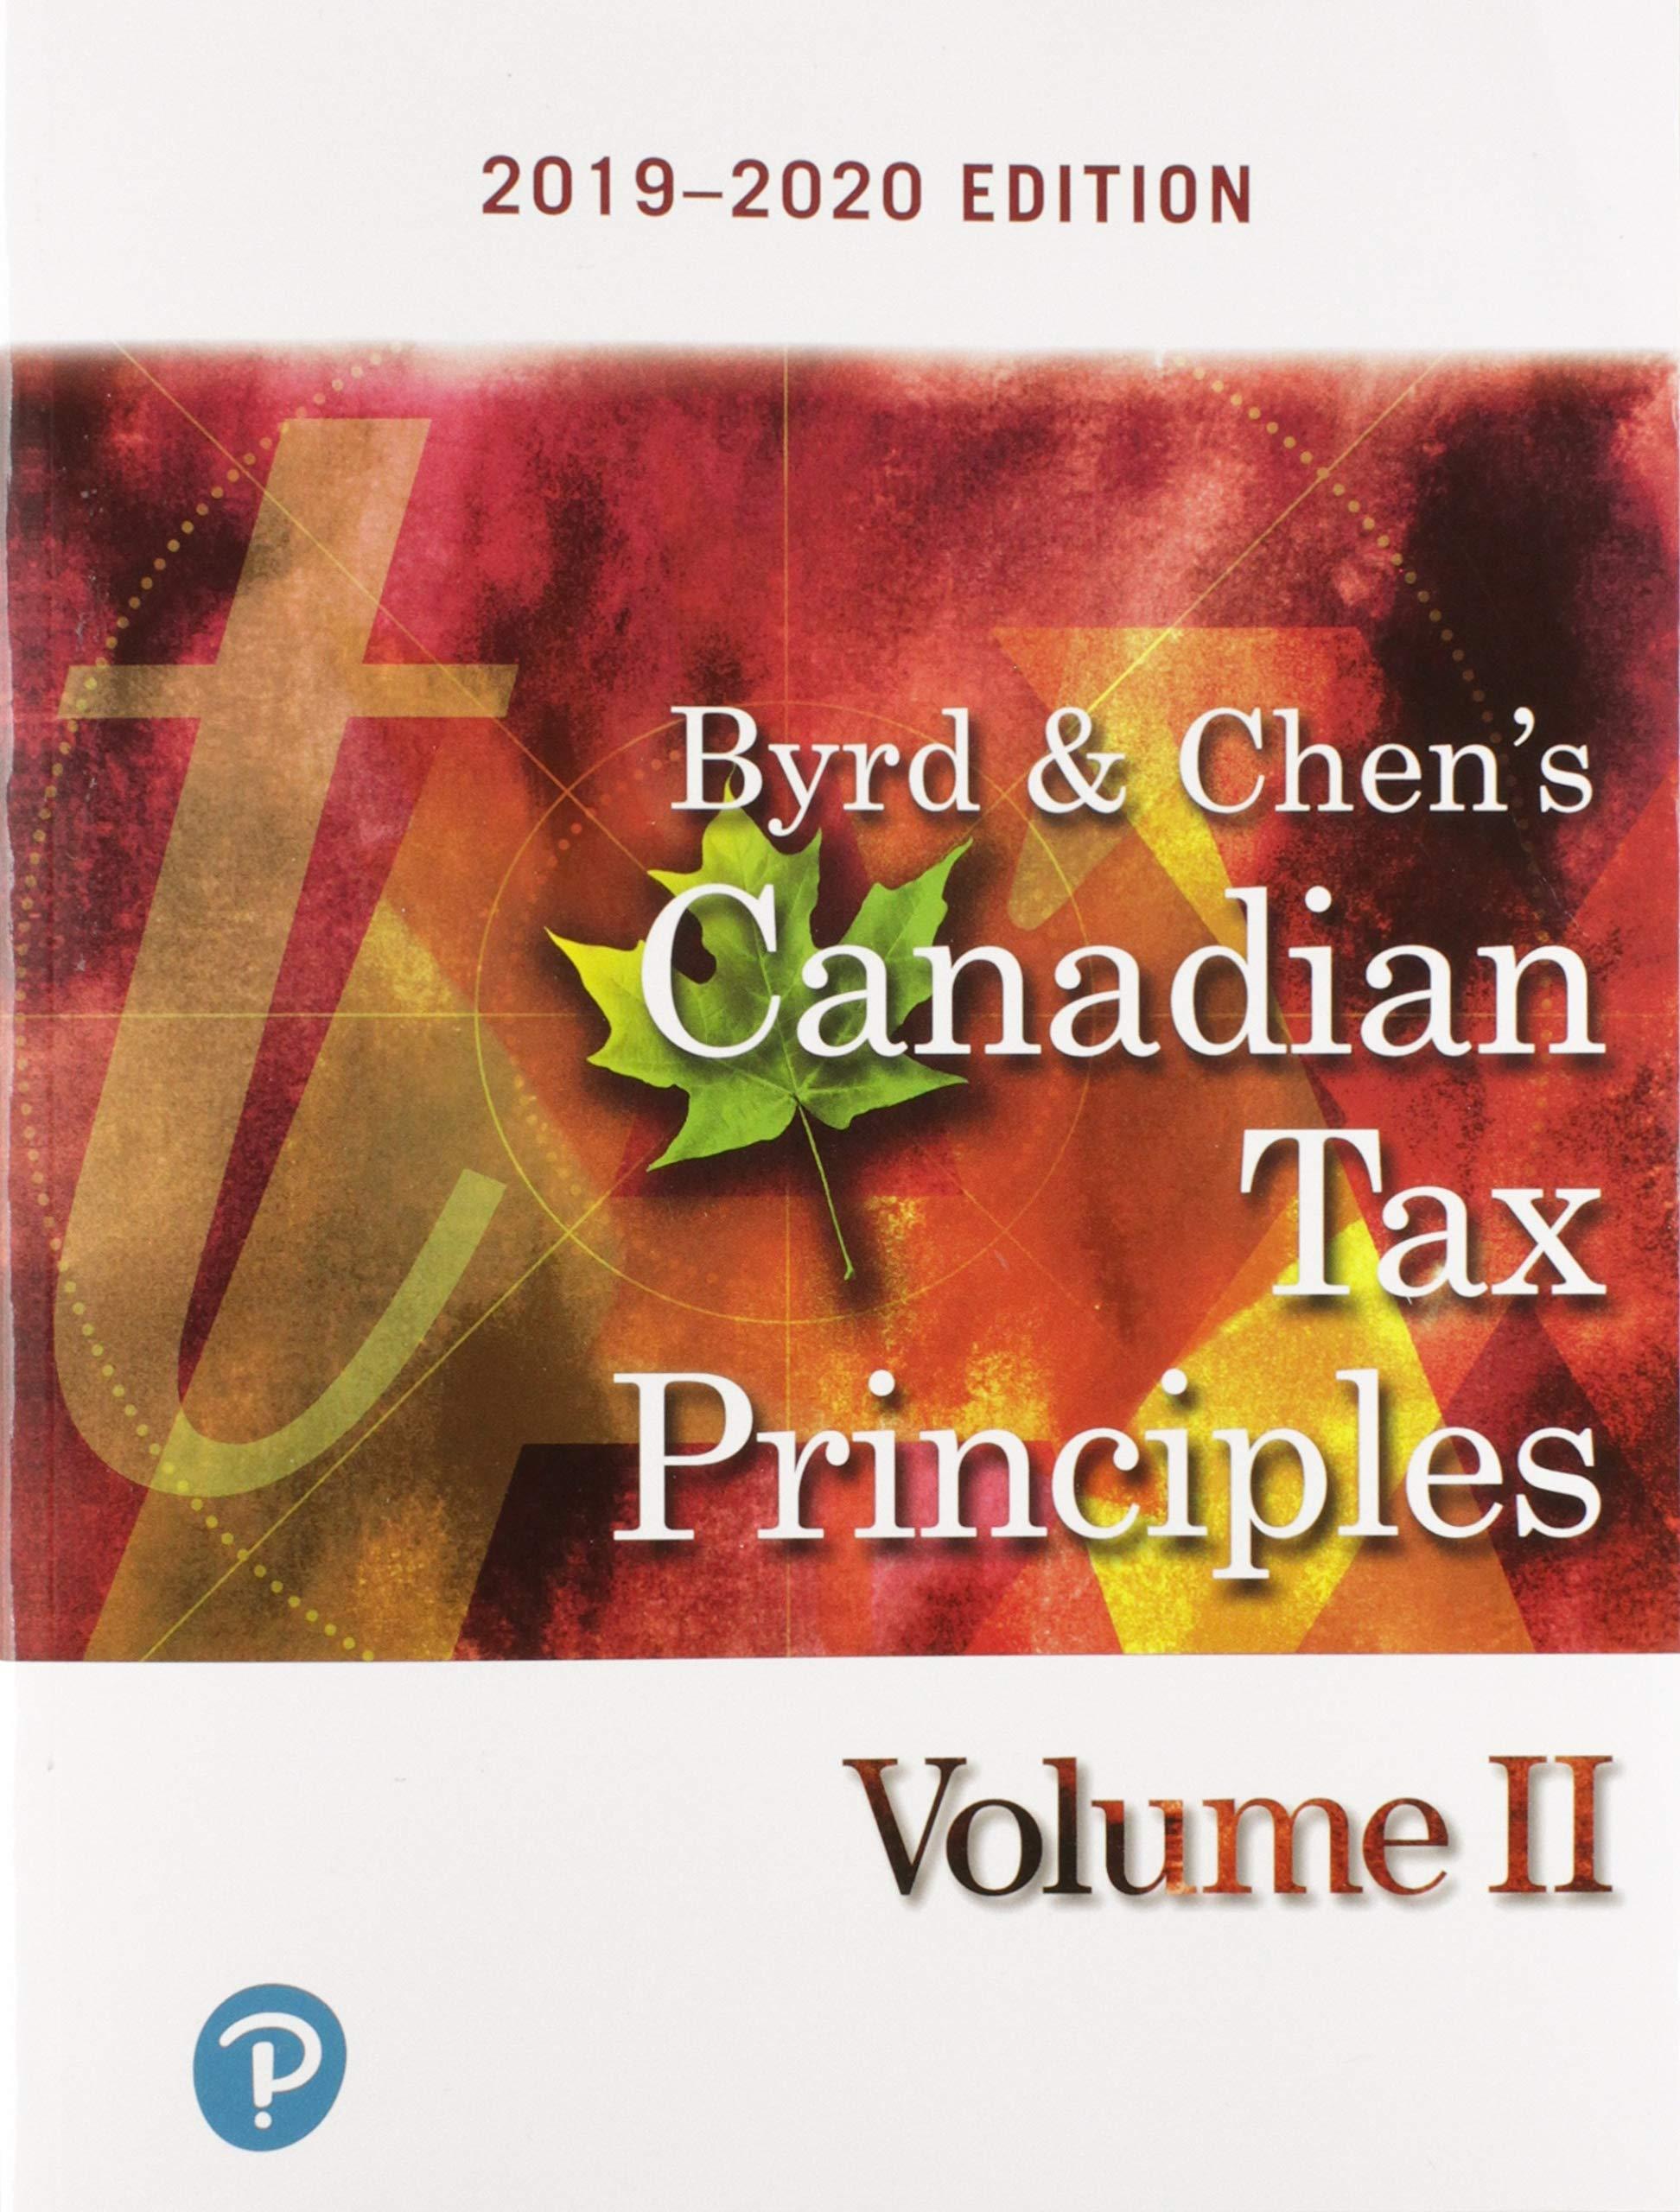 canadian tax principles volume 2 2019-2020 edition clarence byrd, ida chen 013581278x, 978-0135812785